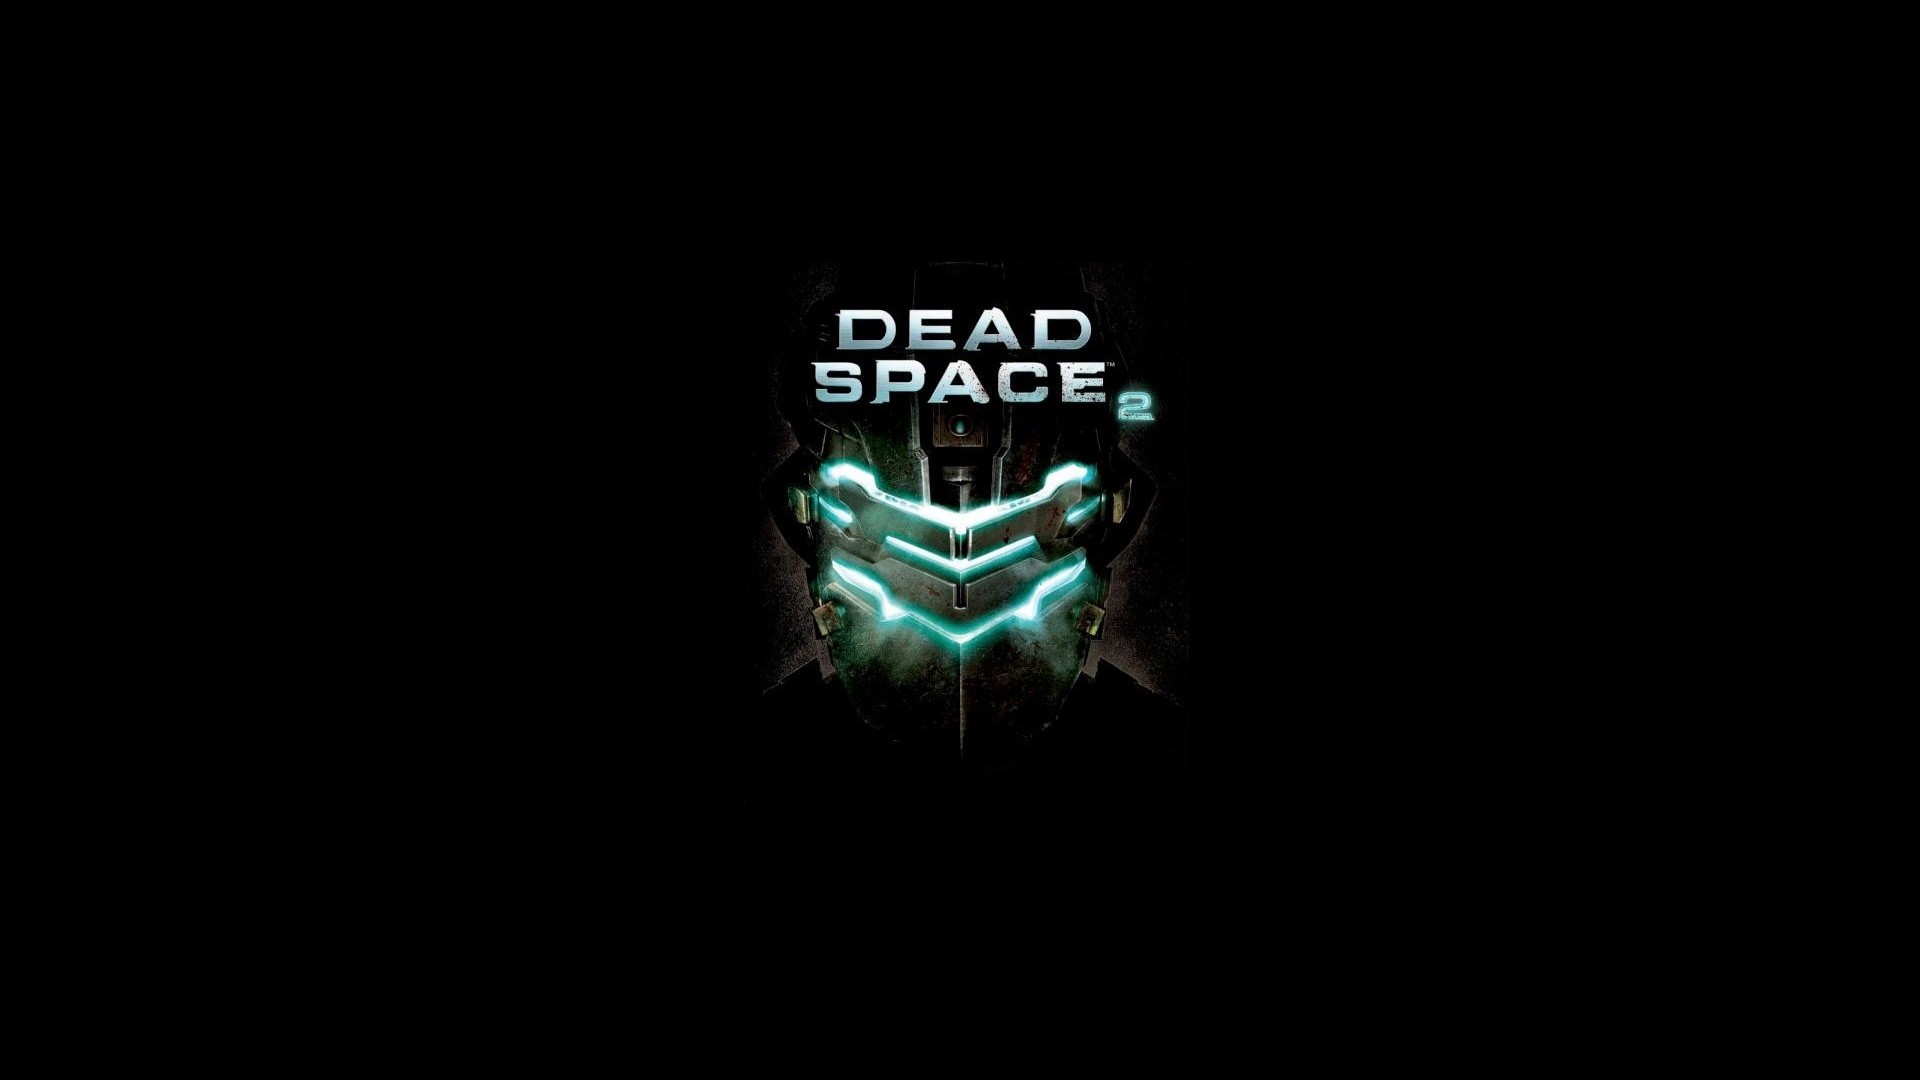 1920x1080 Free Amazing Dead Space Images on your PC